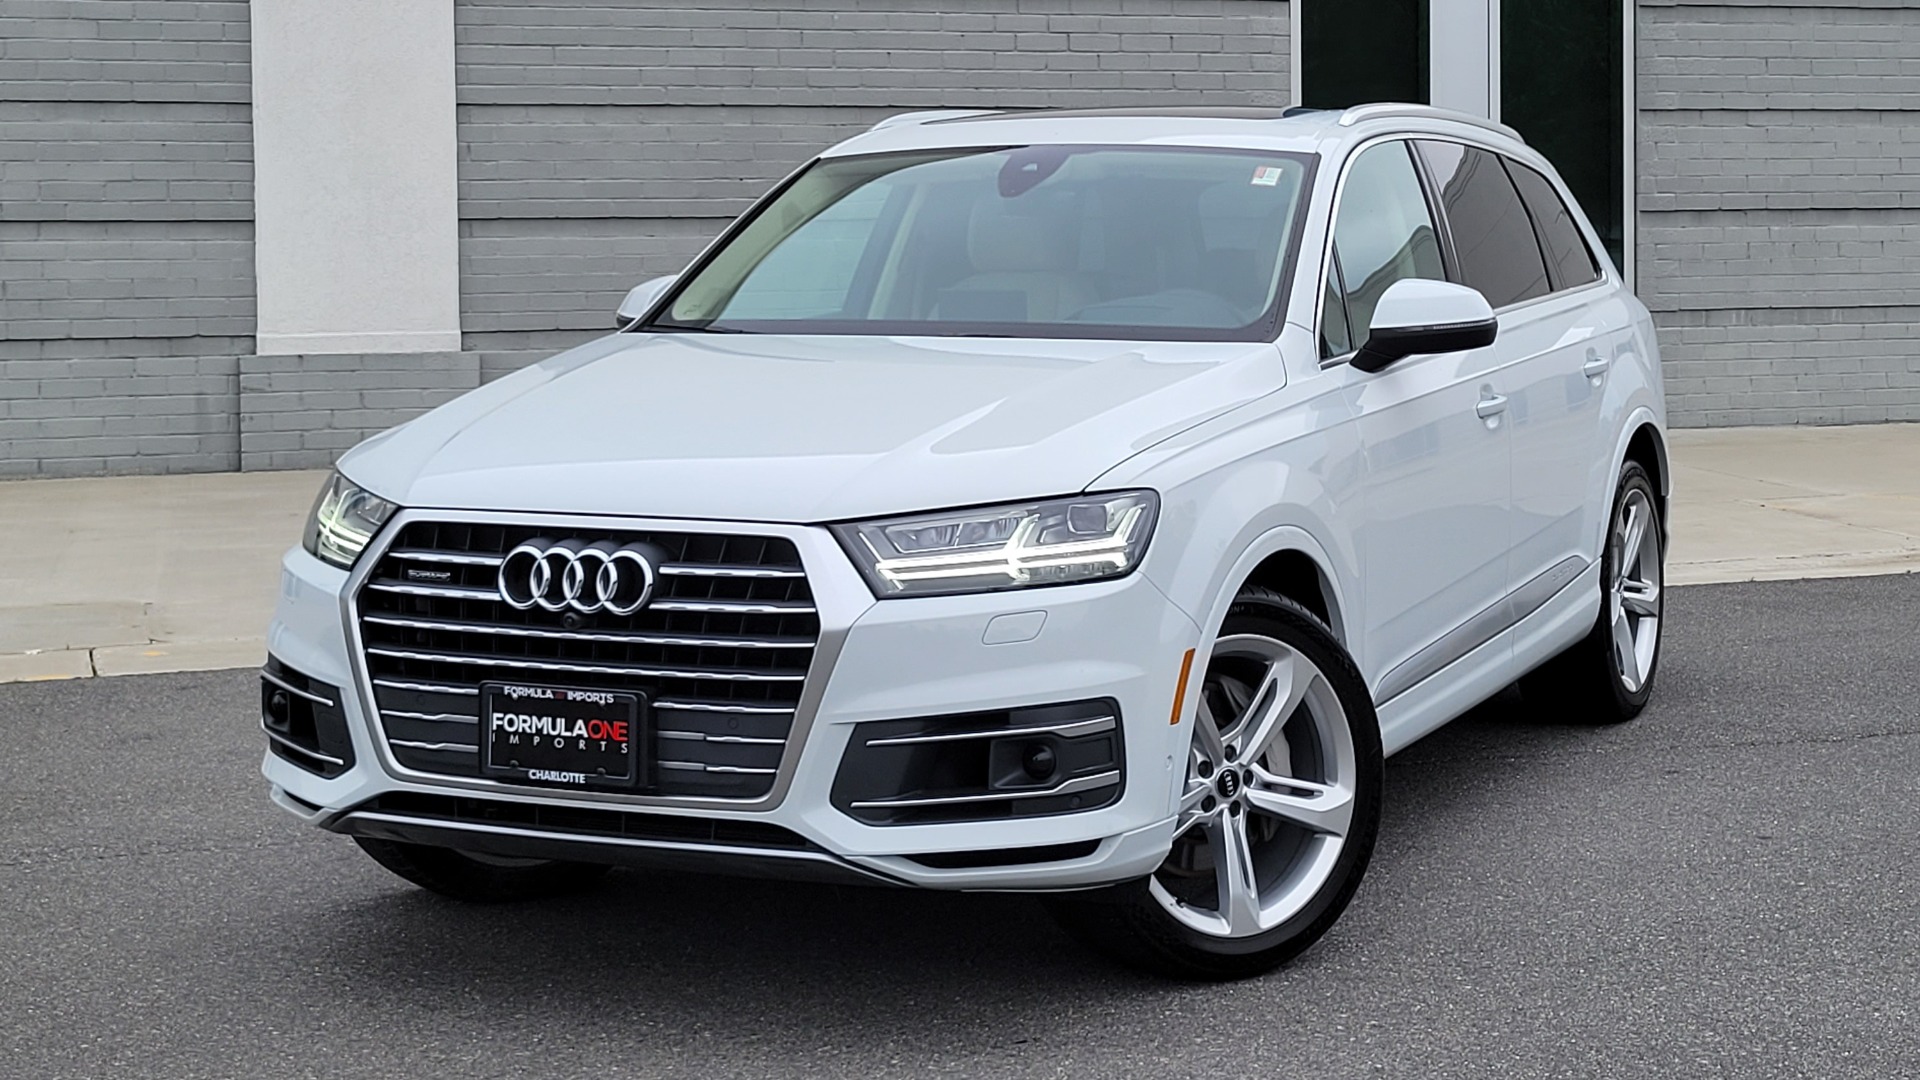 Used 2019 Audi Q7 PRESTIGE / CONV PKG / BOSE / HUD / CLD WTHR / TOWING / REARVIEW for sale $51,995 at Formula Imports in Charlotte NC 28227 7